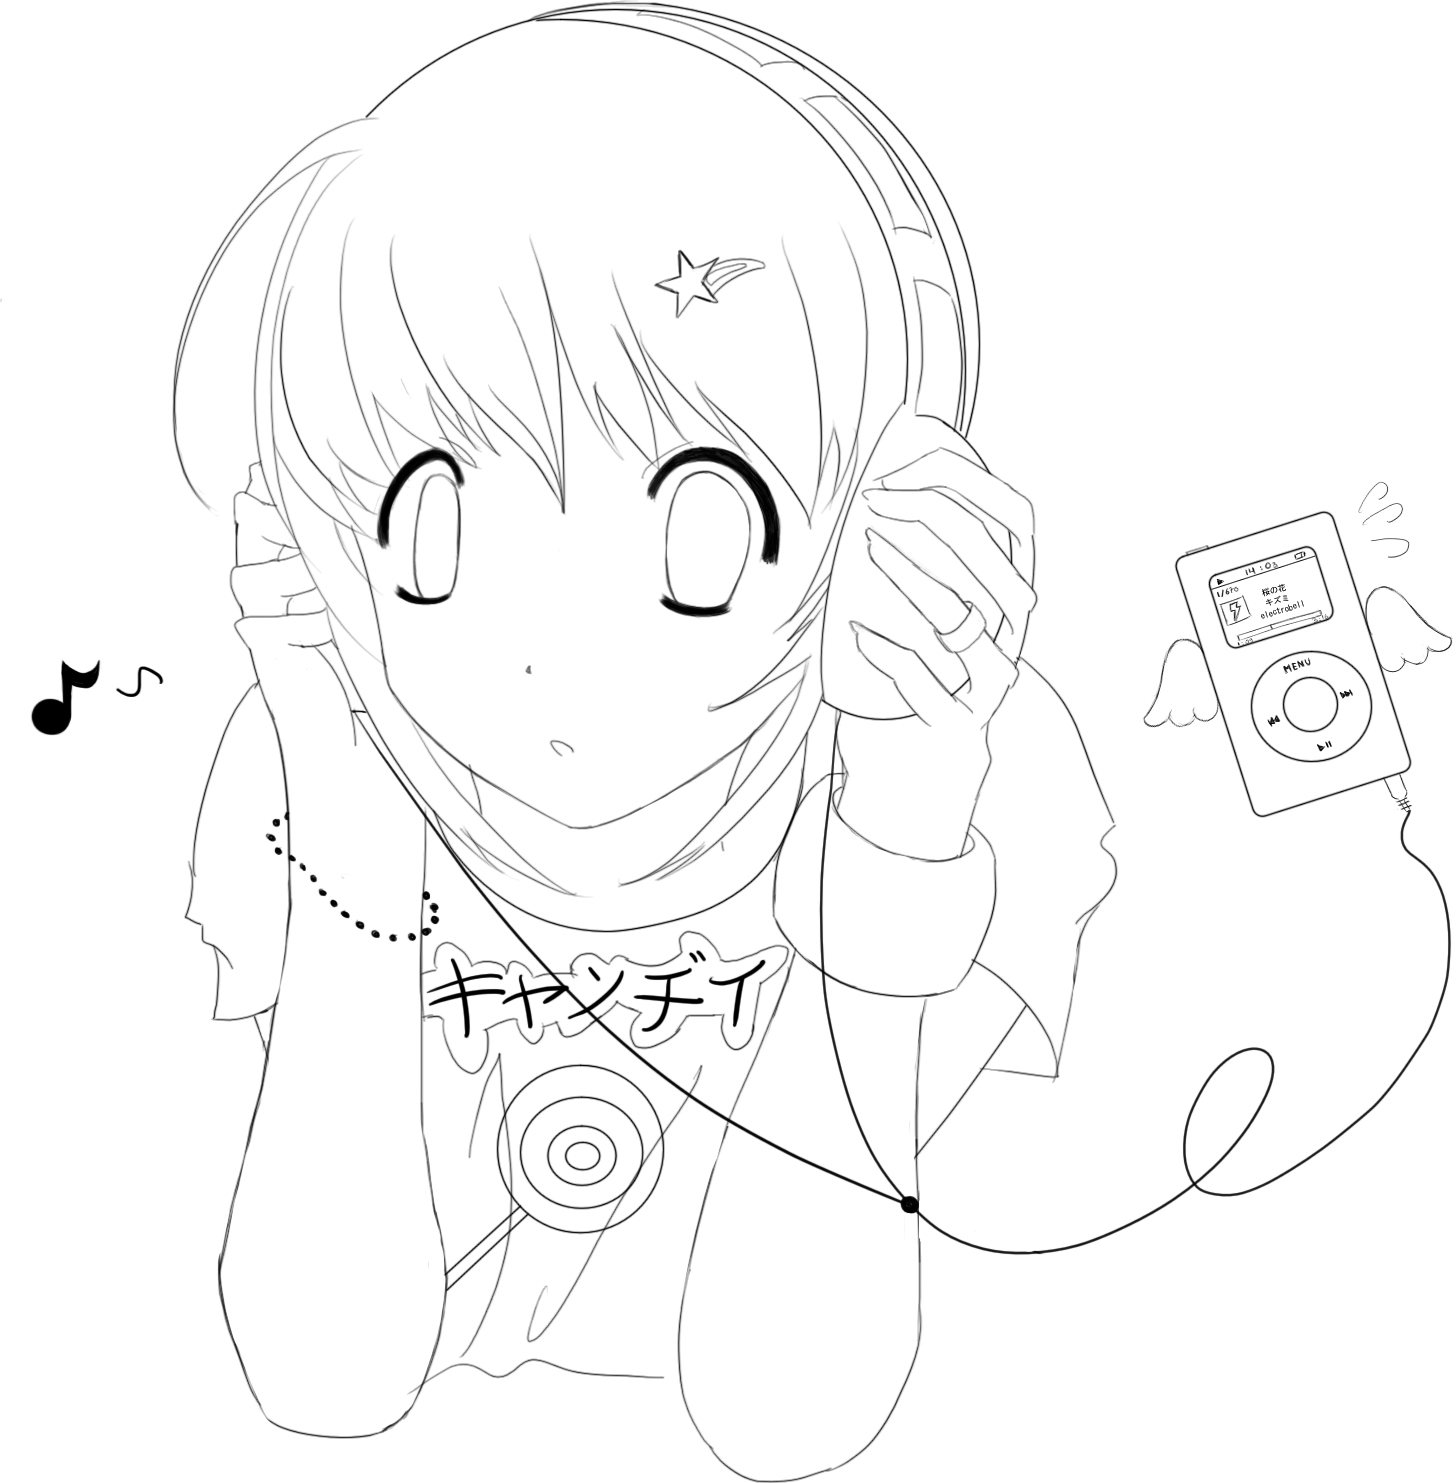 Flying iPod -Lineart- by Hoshiful on DeviantArt